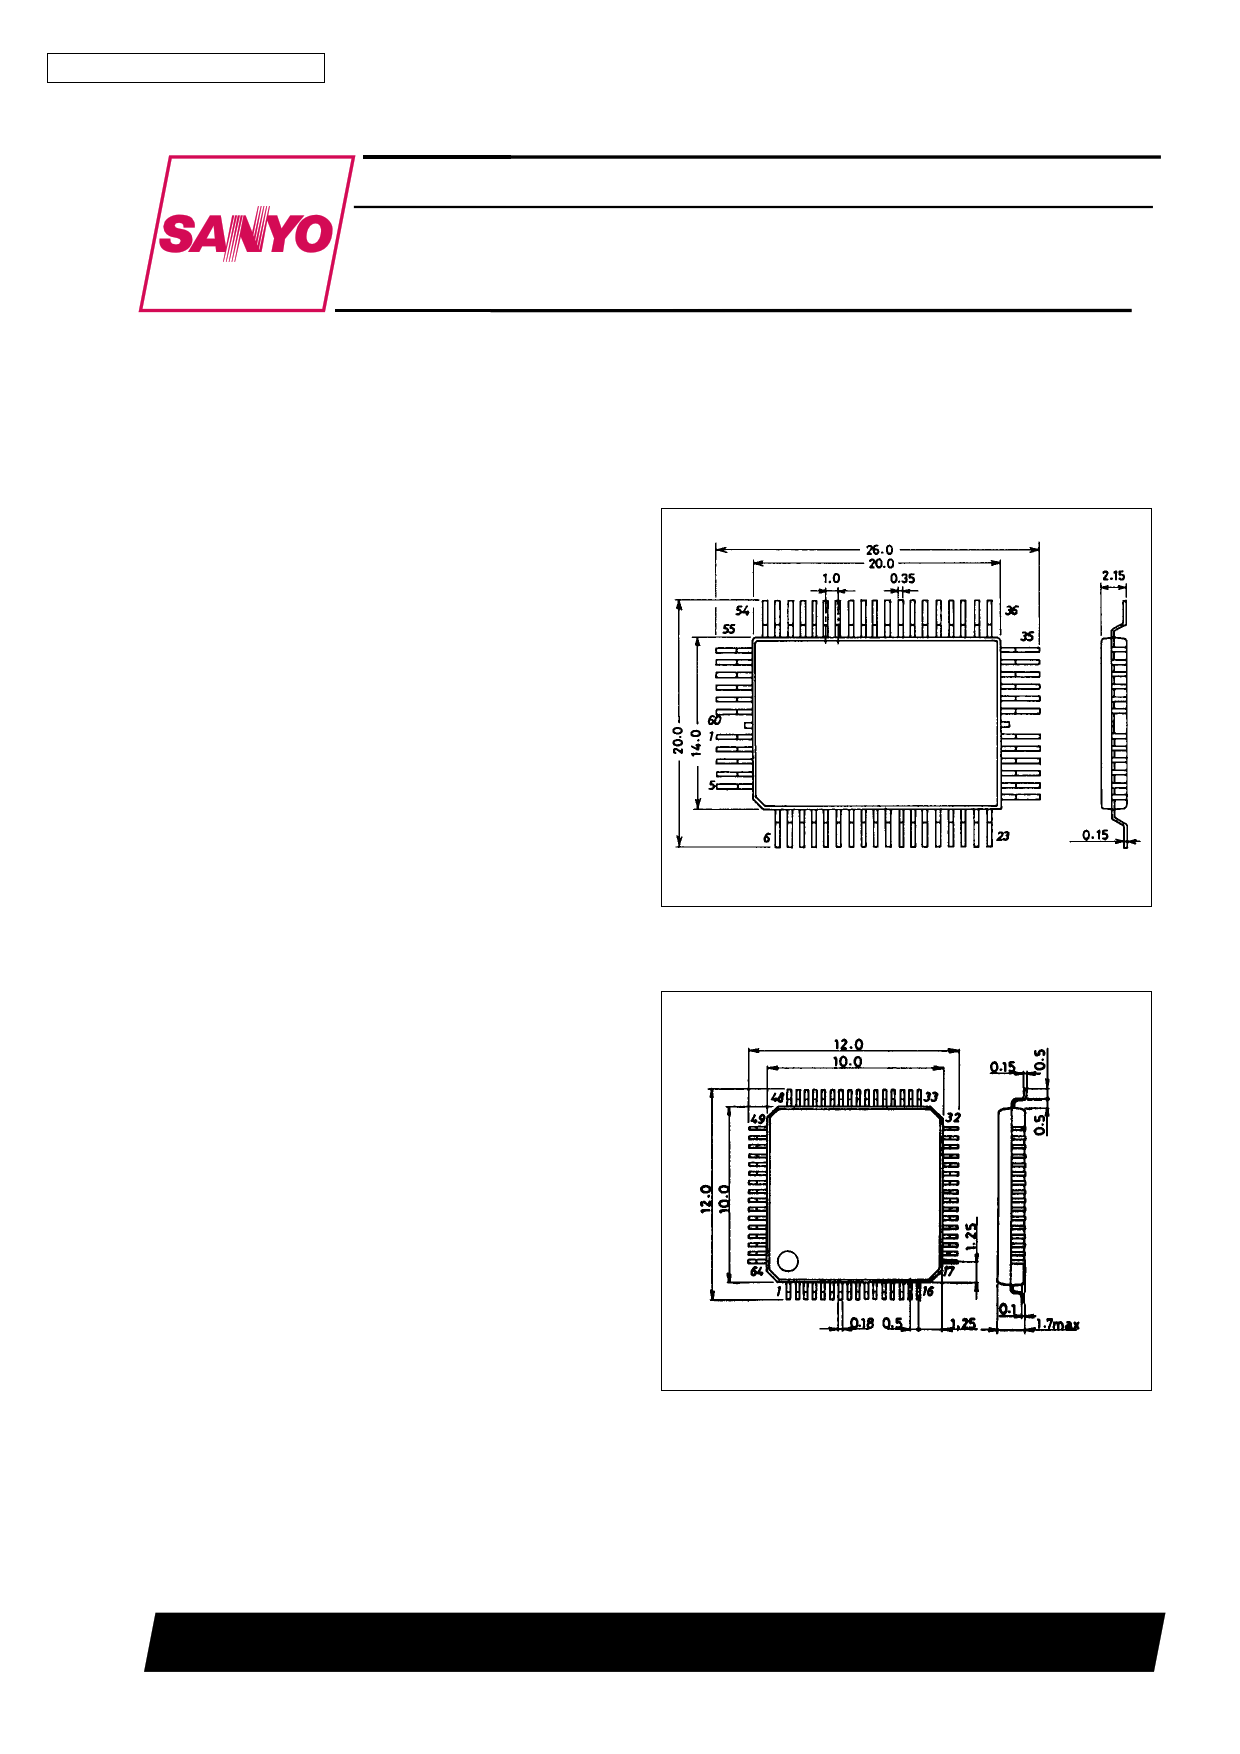 LC7930NW Datasheet, Funktion